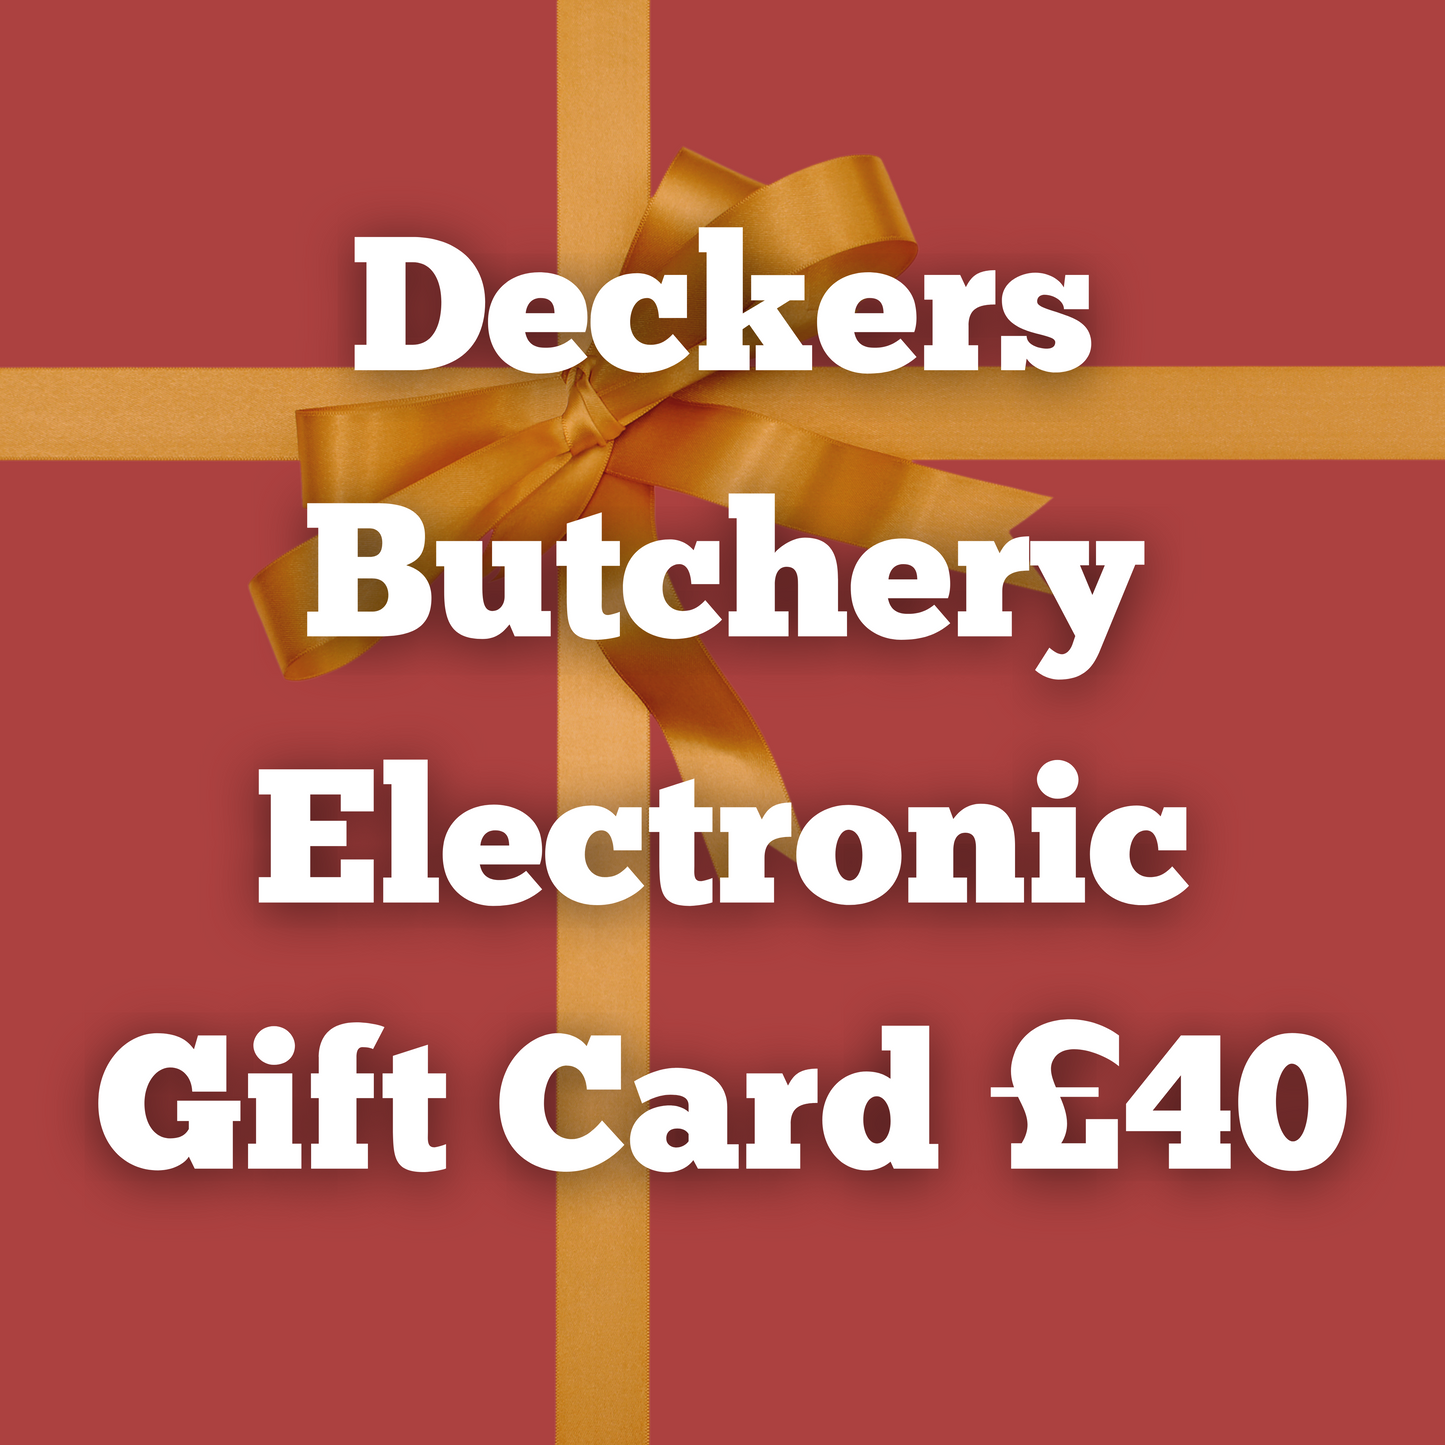 Deckers Butchery Electronic Gift Cards